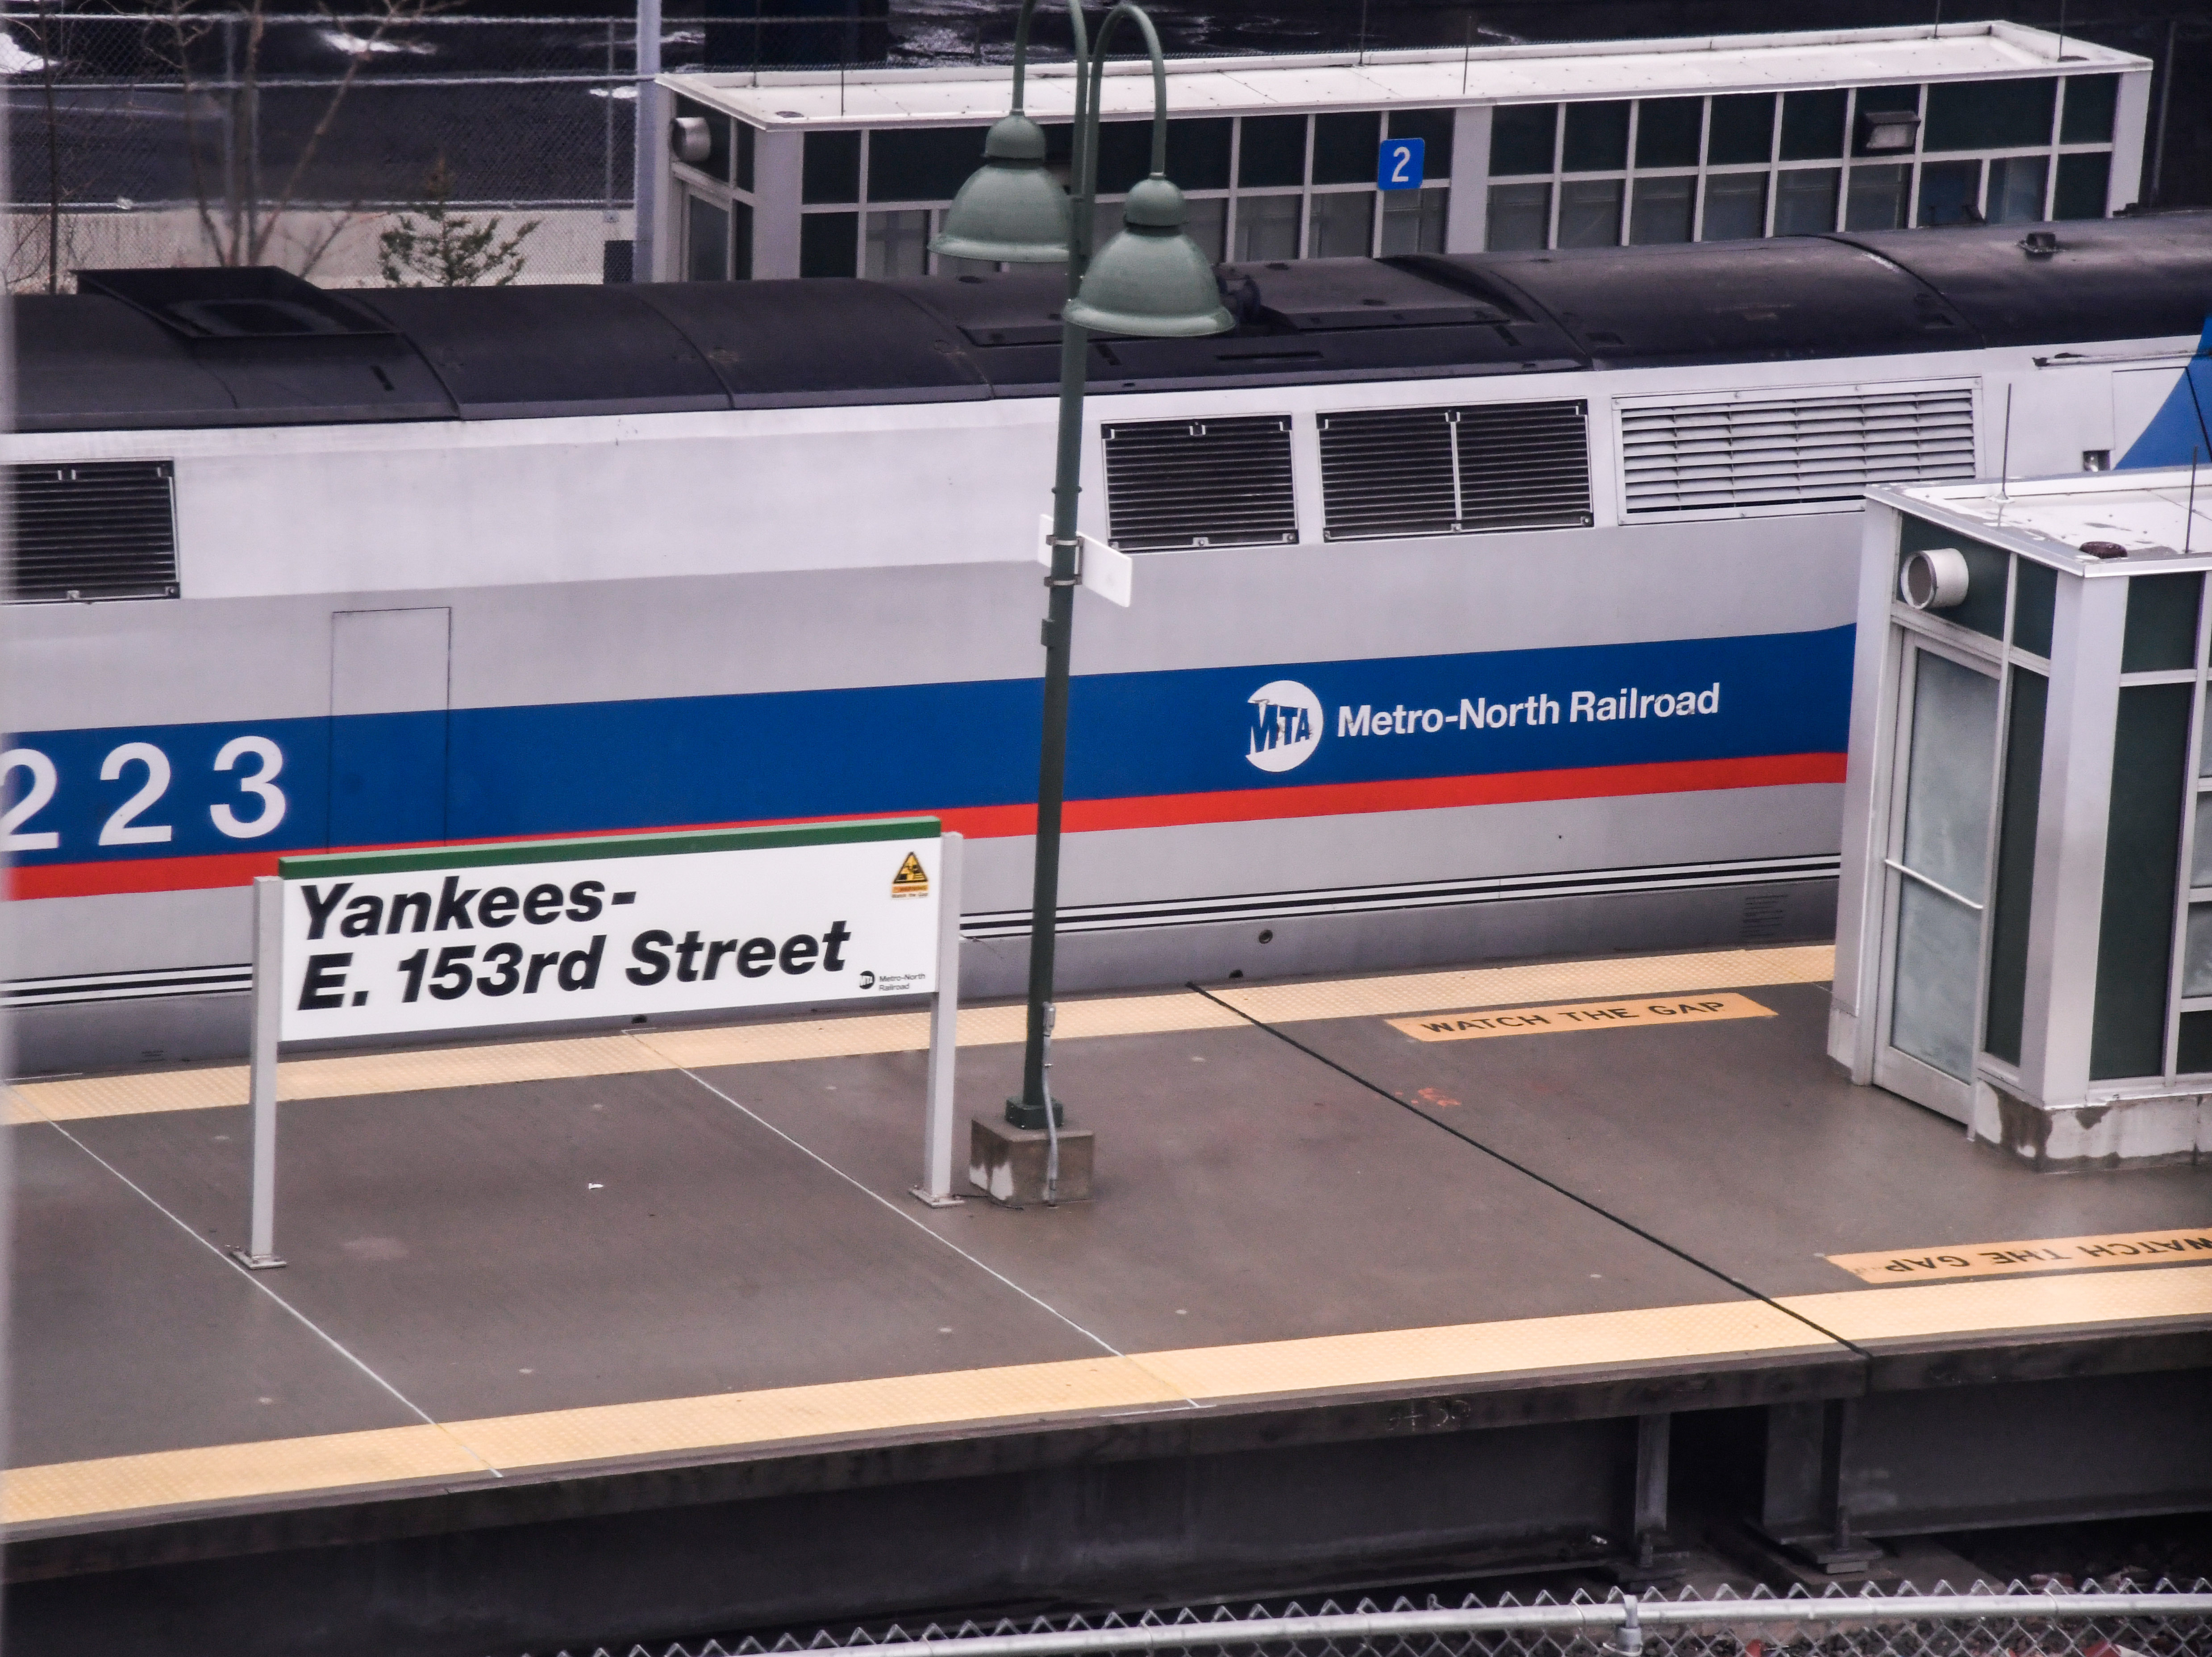 The Yankees Are Back - and So is Our Train to the Game Service!